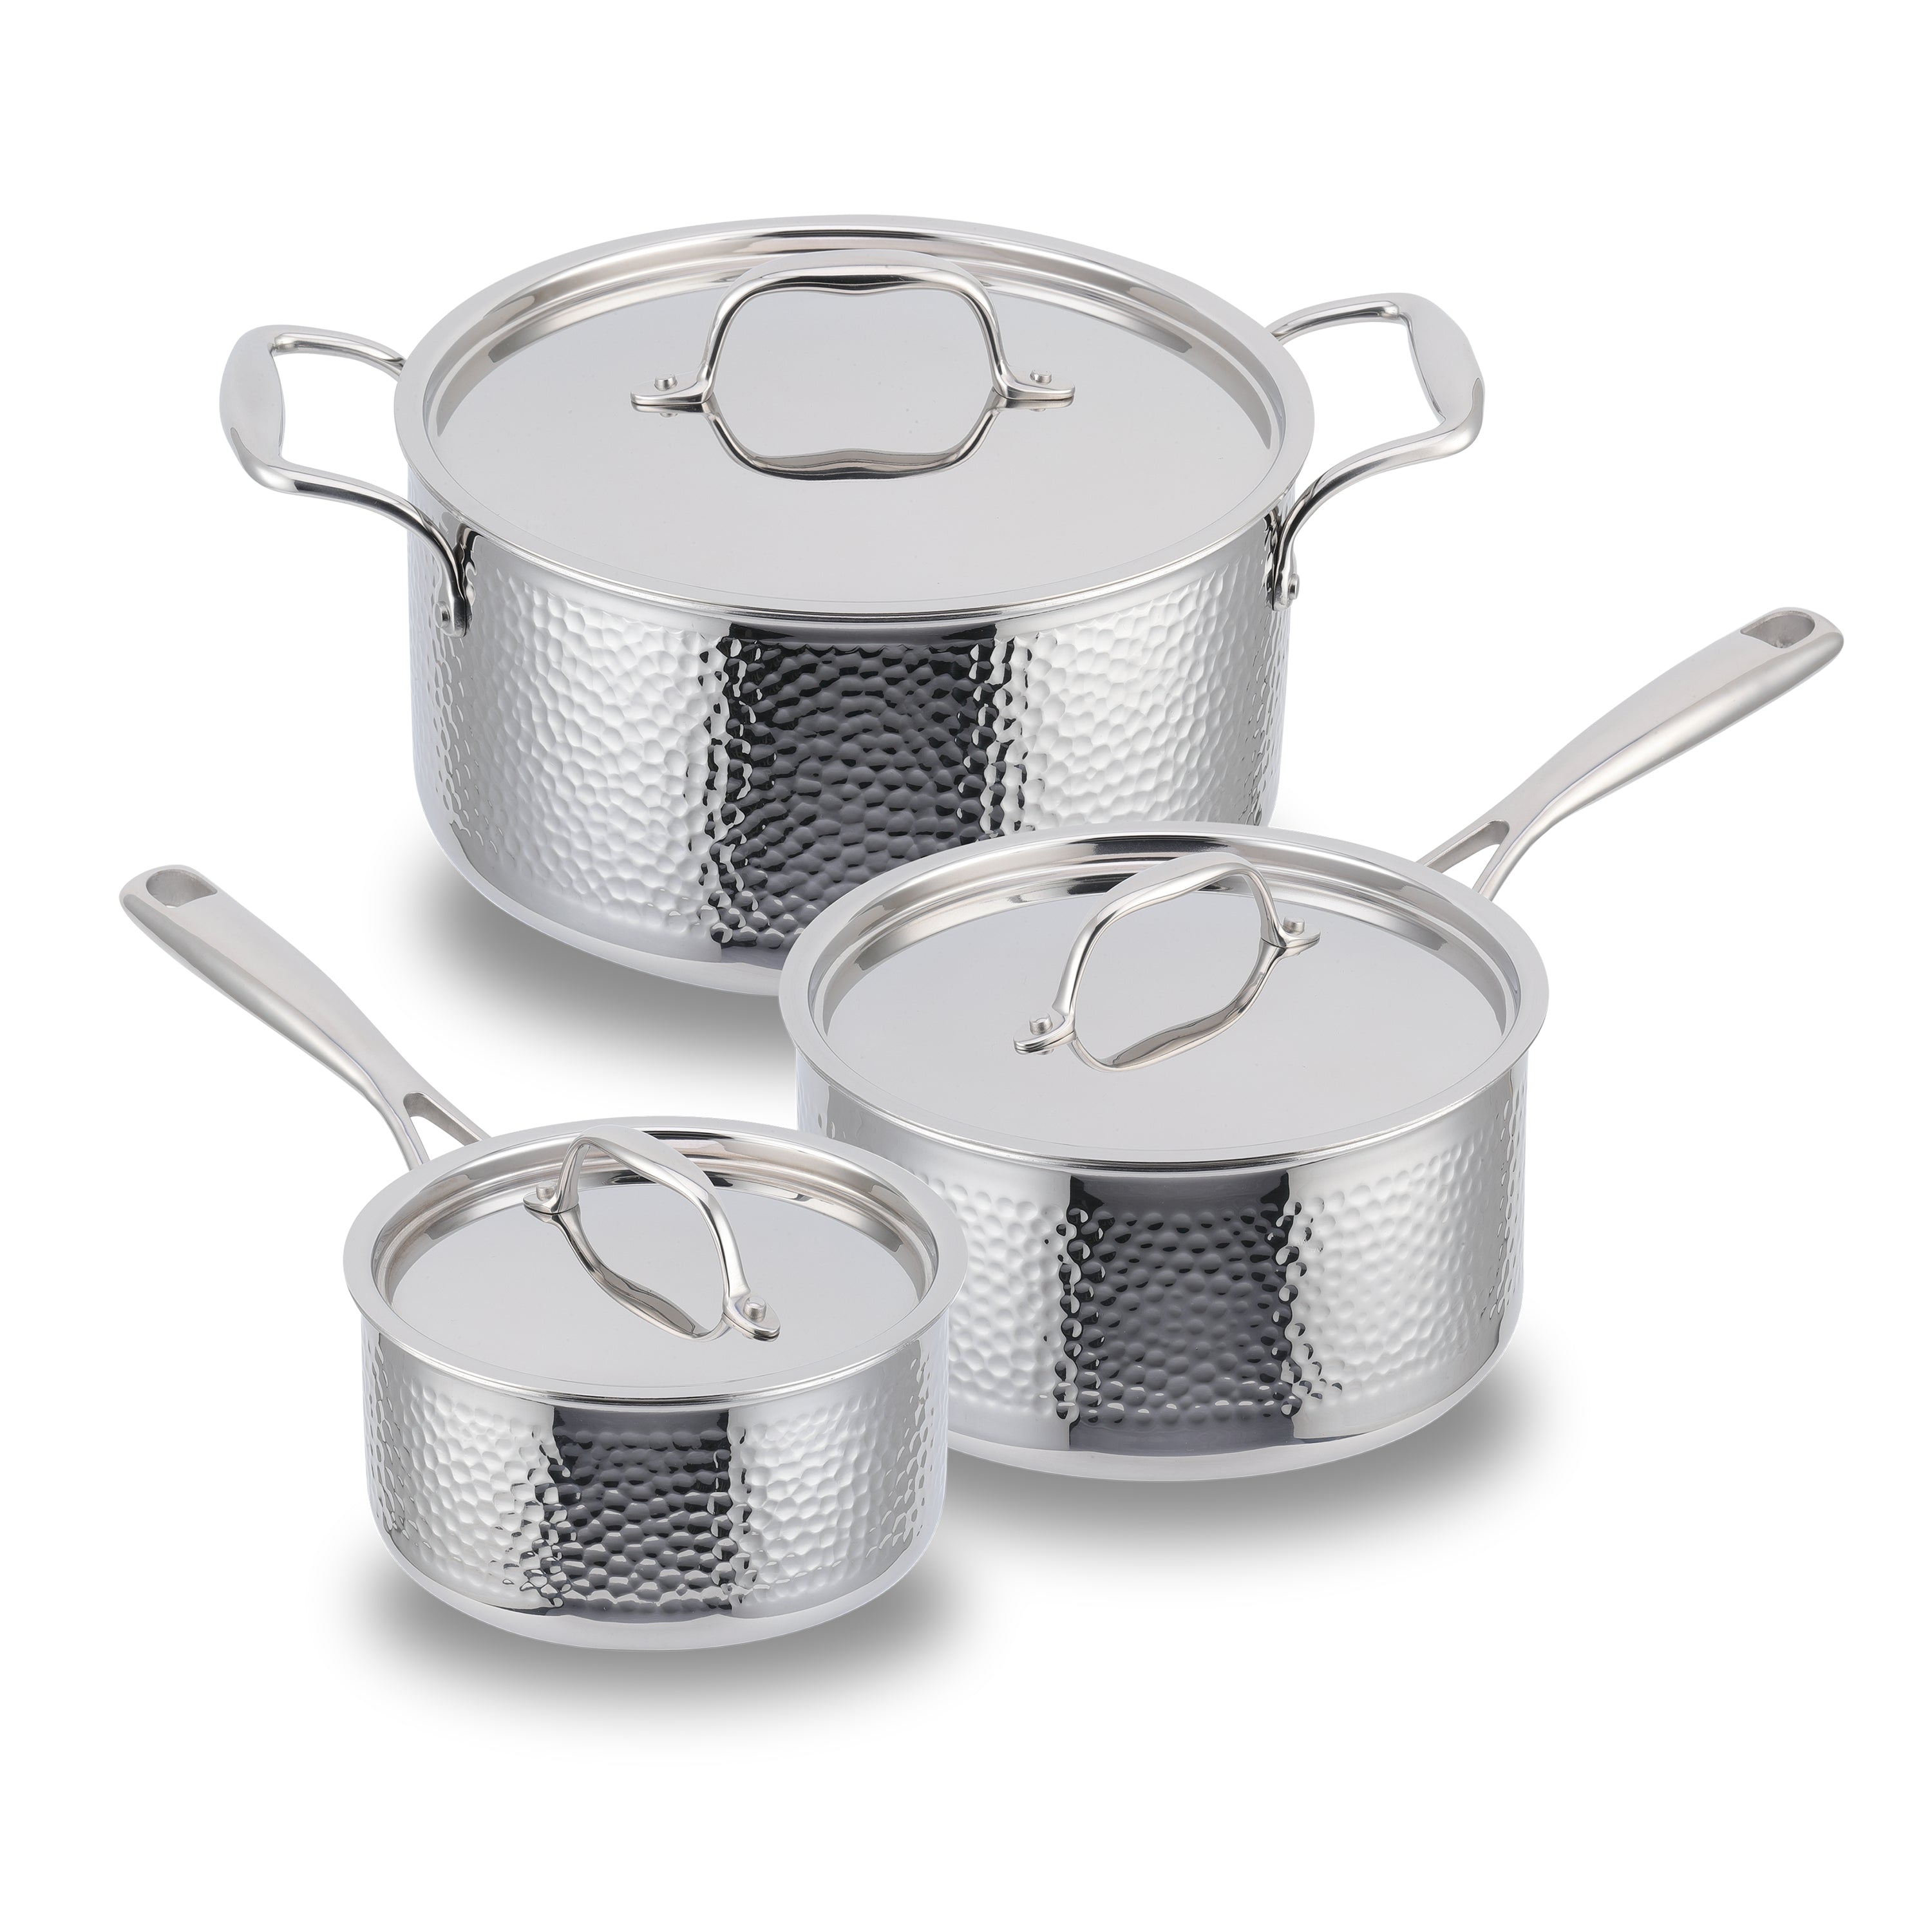 Classic Stainless Steel Sauté Pan with Lid